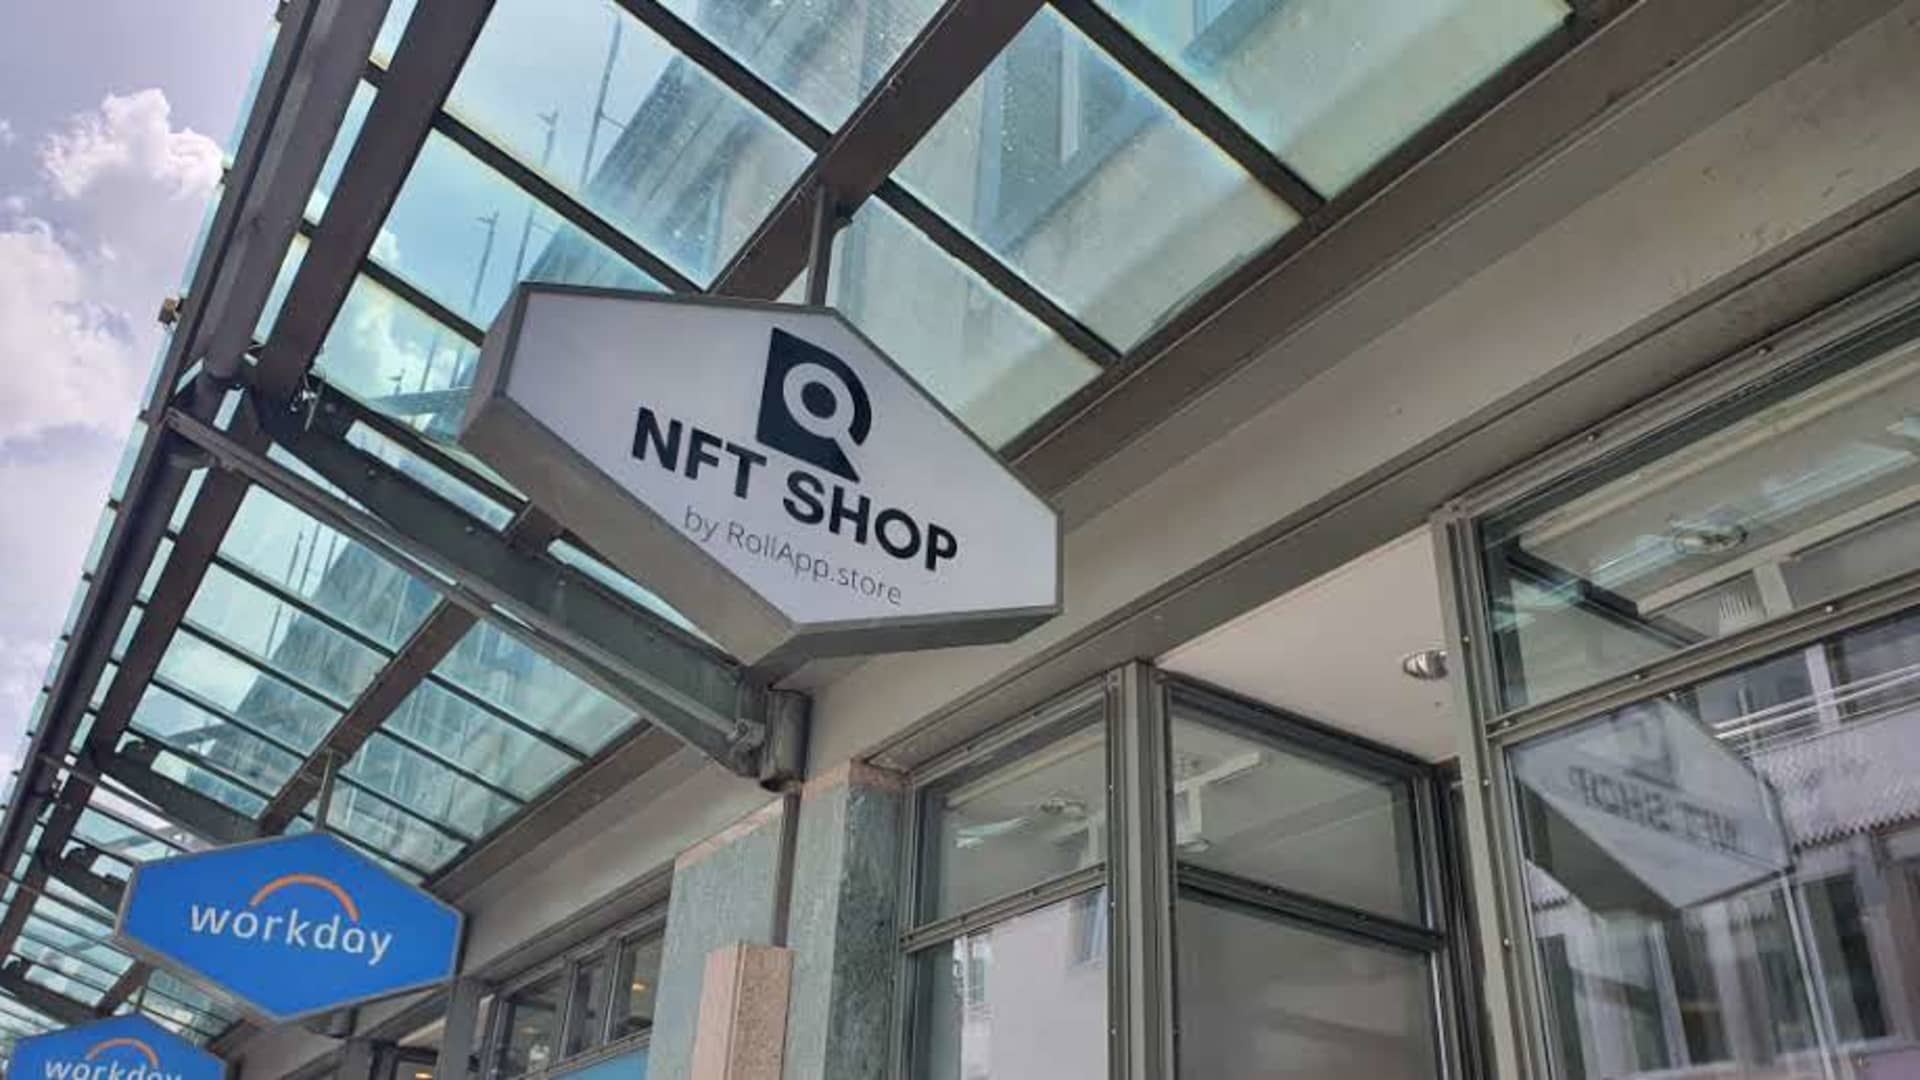 Non-fungible tokens is a big topic during discussions around the World Economic Forum. RollApp, which runs an NFT store, set up a location in Davos to promote the digital collectibles.